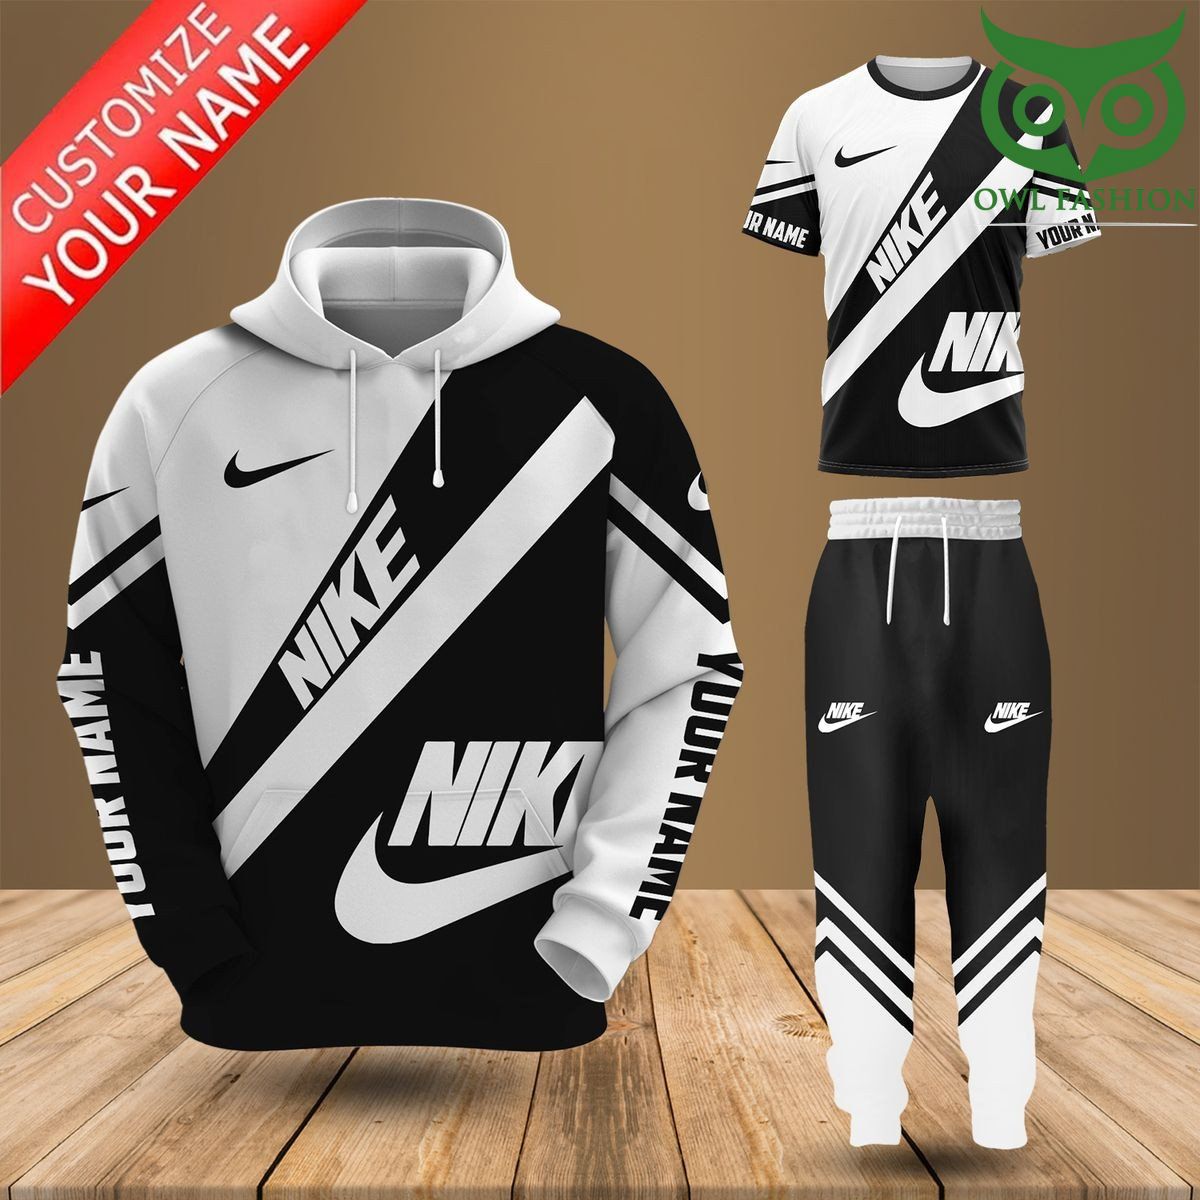 Personalized Nike luxury black and white design hoodies and sweatpants